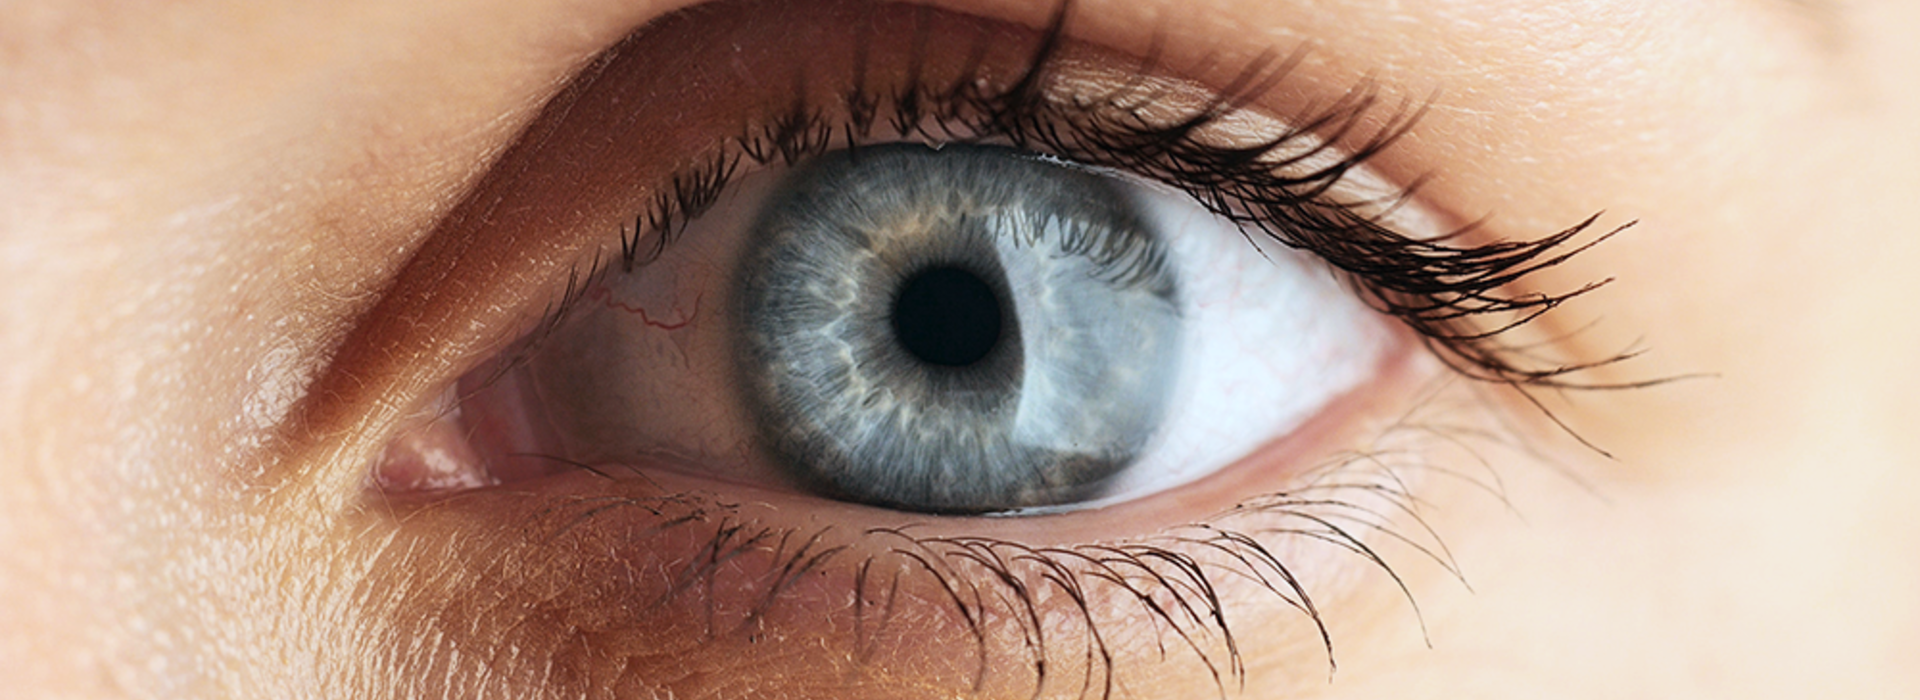 A close-up of a woman's eyeball